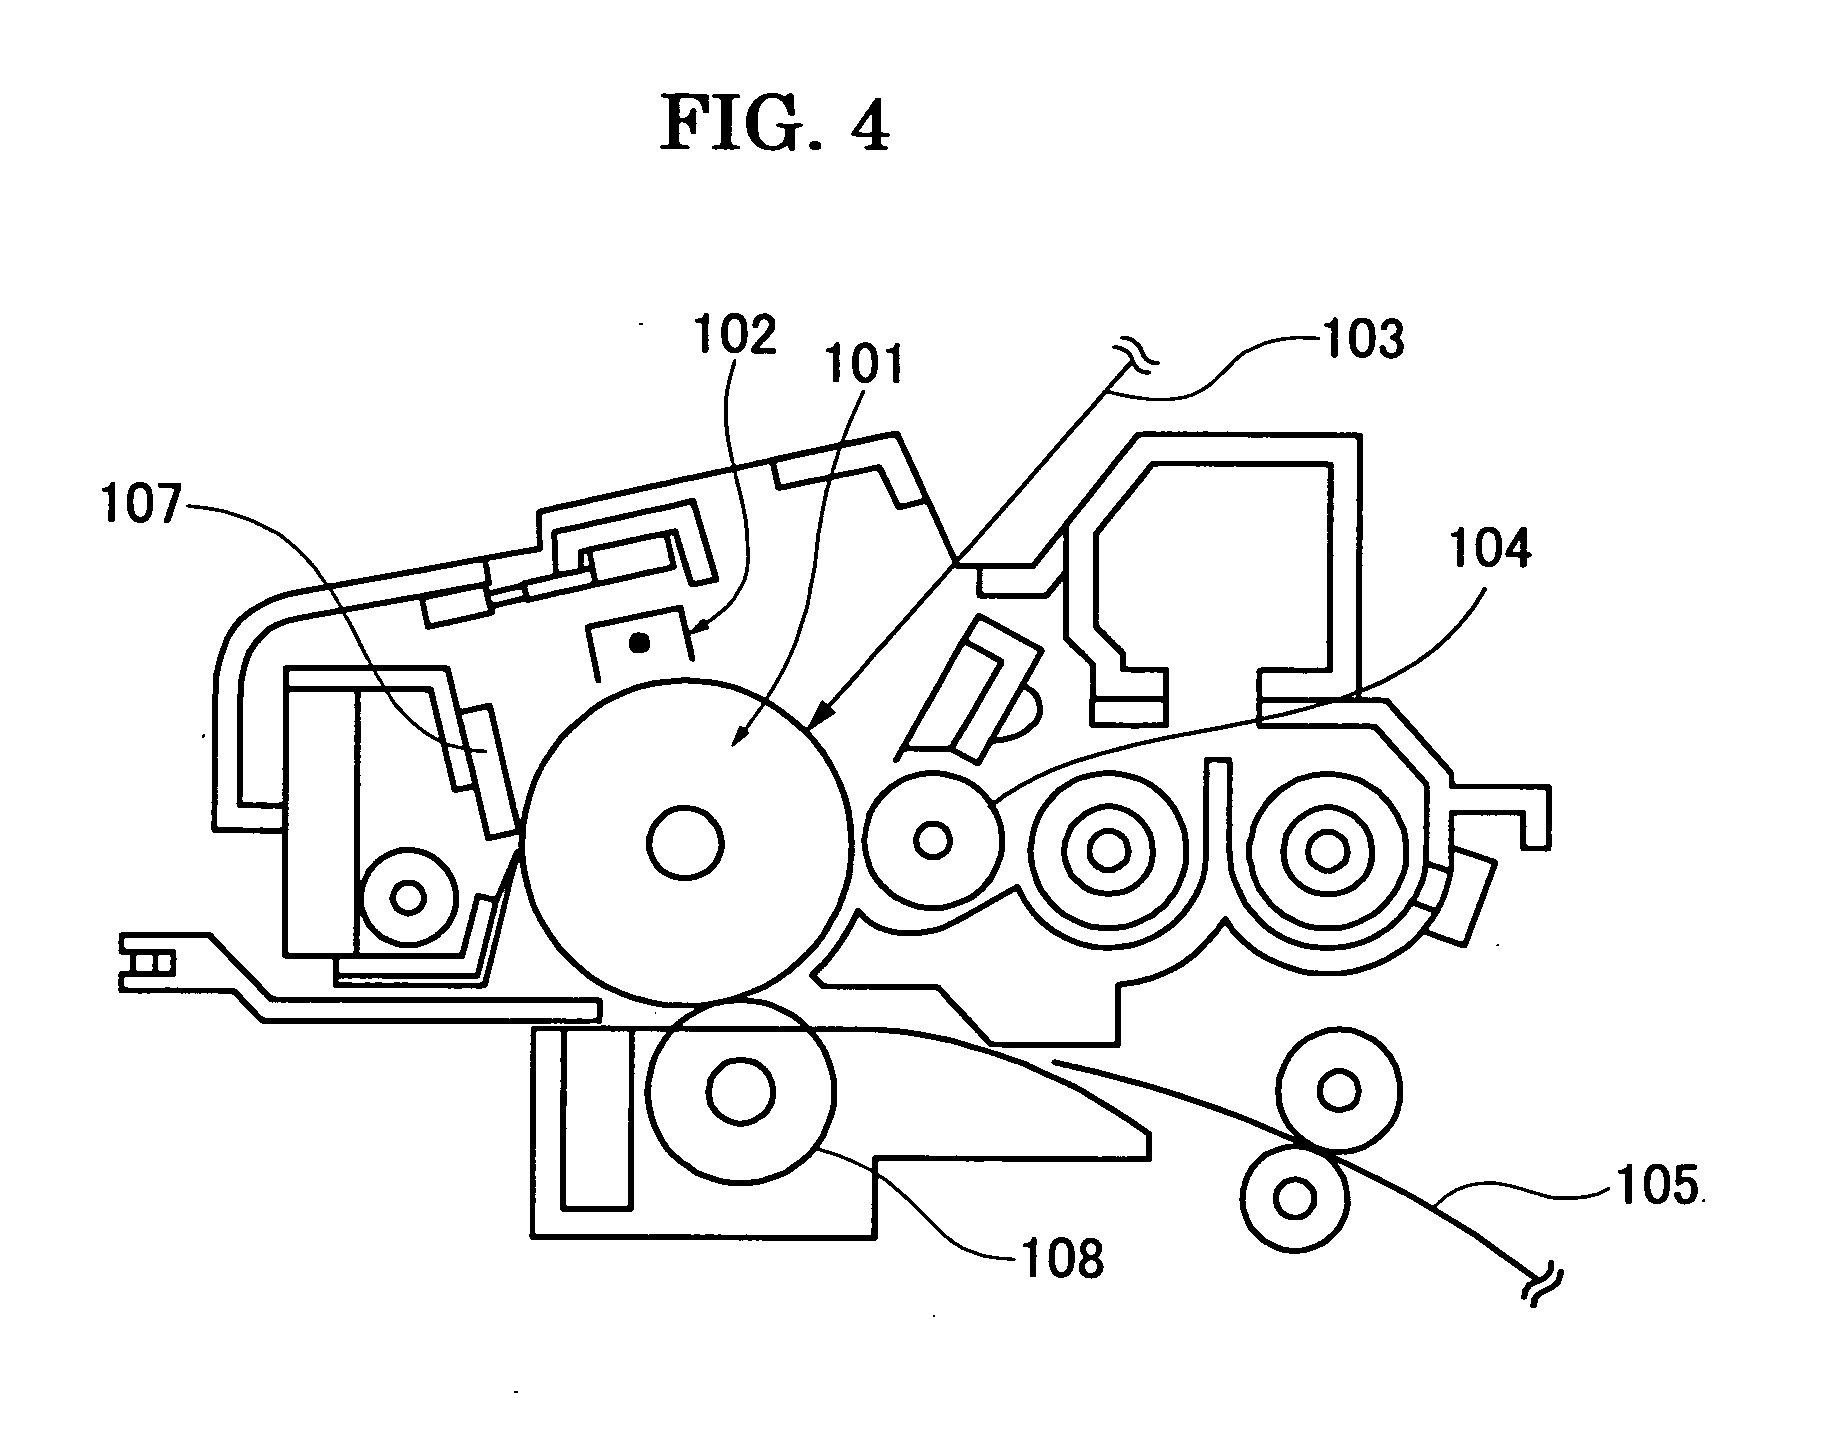 Photoconductor, image forming process, image forming apparatus, and process cartridge